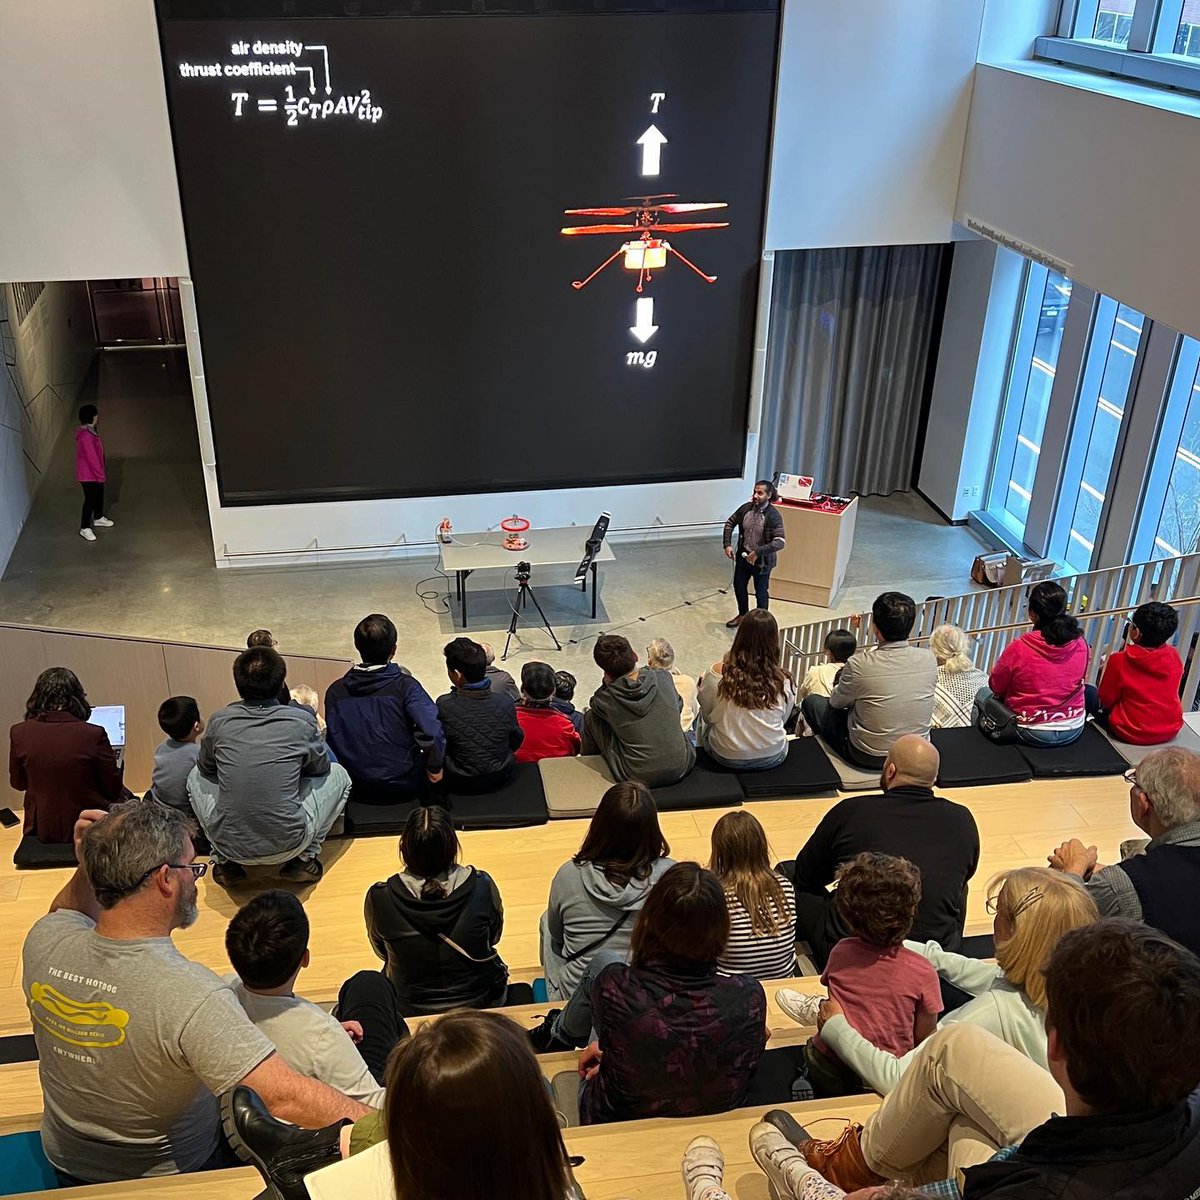 Fun was had at the @mitmuseum during #SpaceWeek where Dr. Tommy Sebastian, @MITLL engineer, and Dr. Sam Birch, planetary scientist at @BrownUniversity were on hand for a live demo and talk about the engineering challenges of flying UAVs on other worlds!